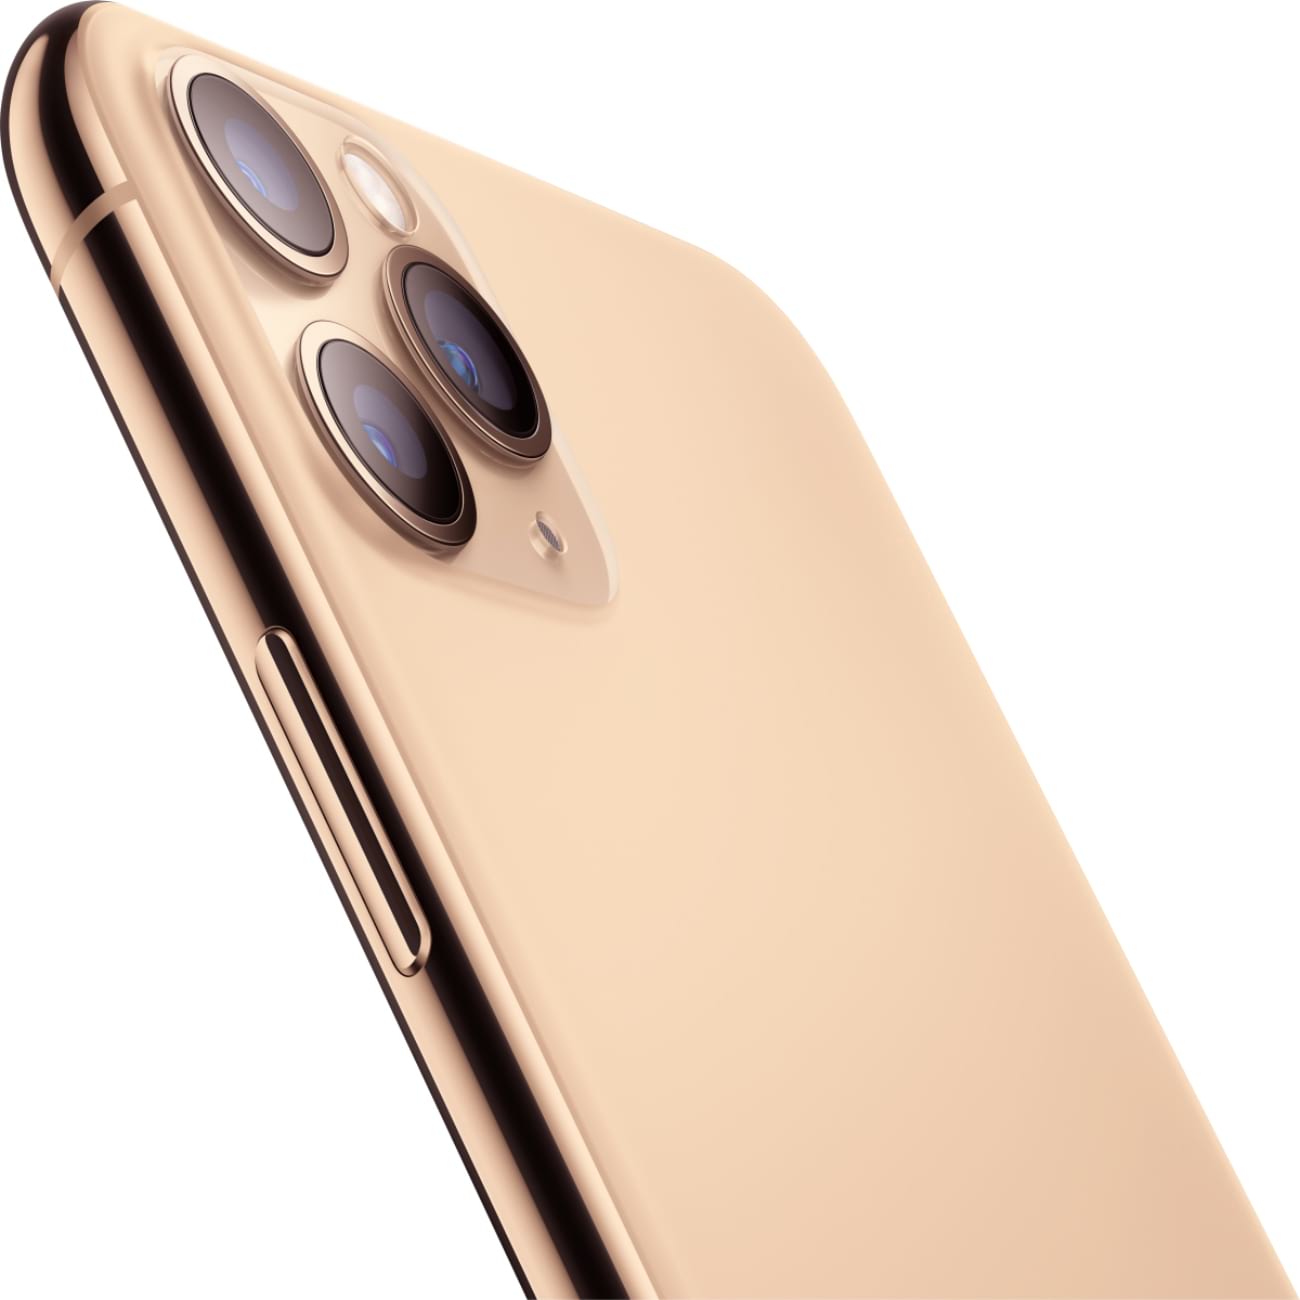 Iphone 15 pro 128gb natural. Iphone 11 Pro Max 256gb Gold. Apple iphone 11 Pro 256gb Gold. Apple iphone 11 Pro Max 256 ГБ золотой. Apple iphone 11 Pro Max 64gb Silver.